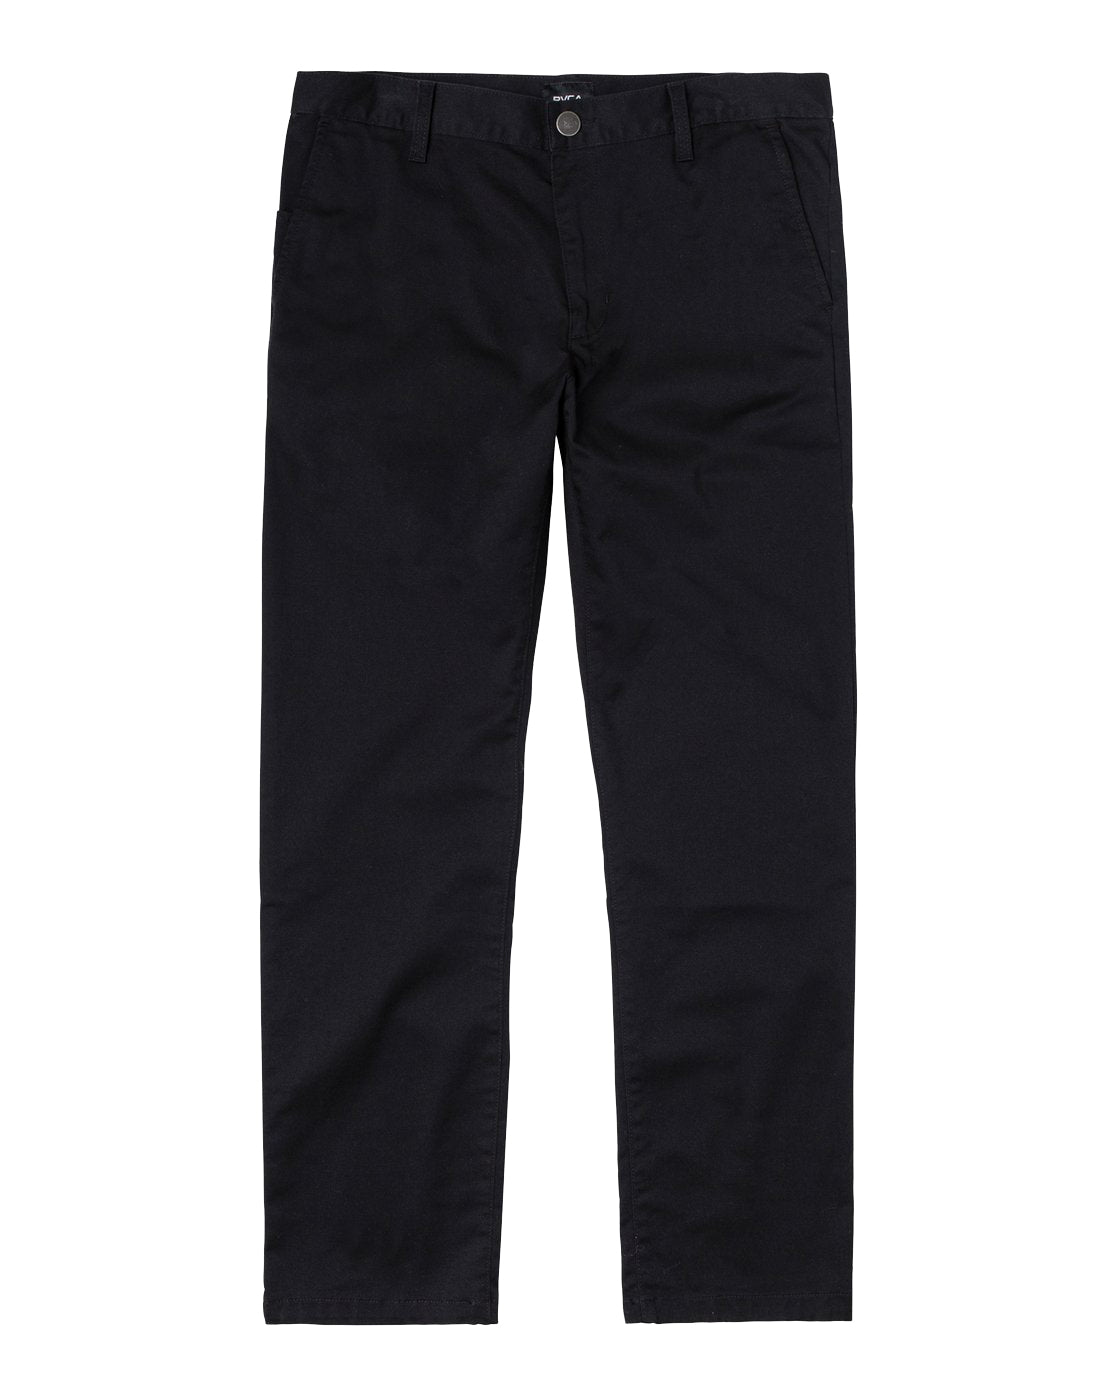 RVCA Weekend Stretch Straight Fit Pant BLK 32